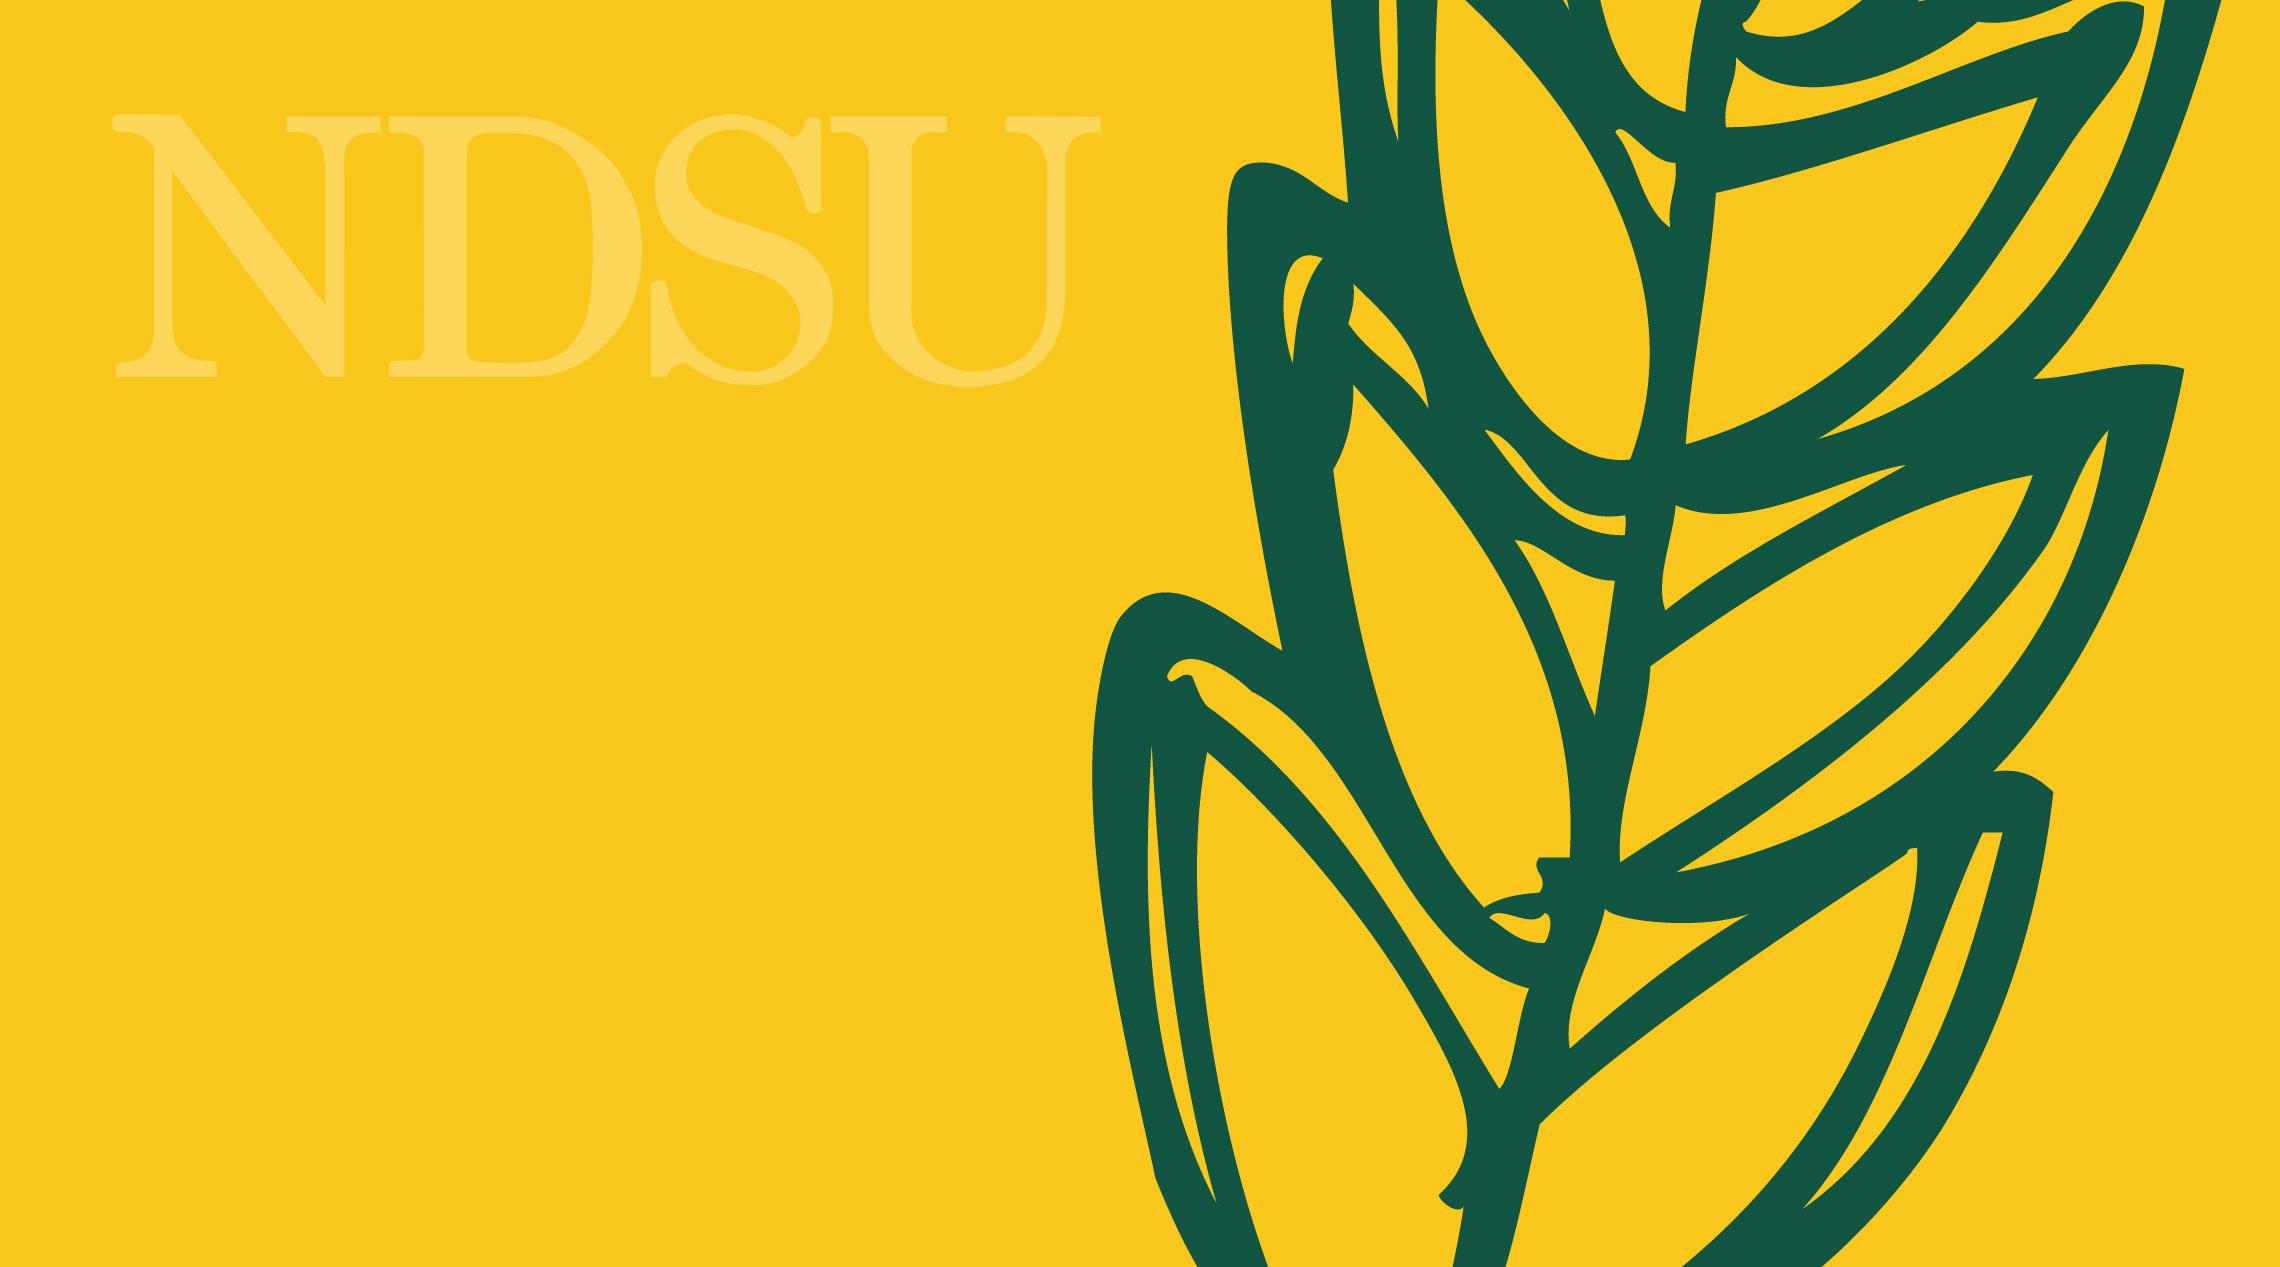 ndsu with green wheat on gold background